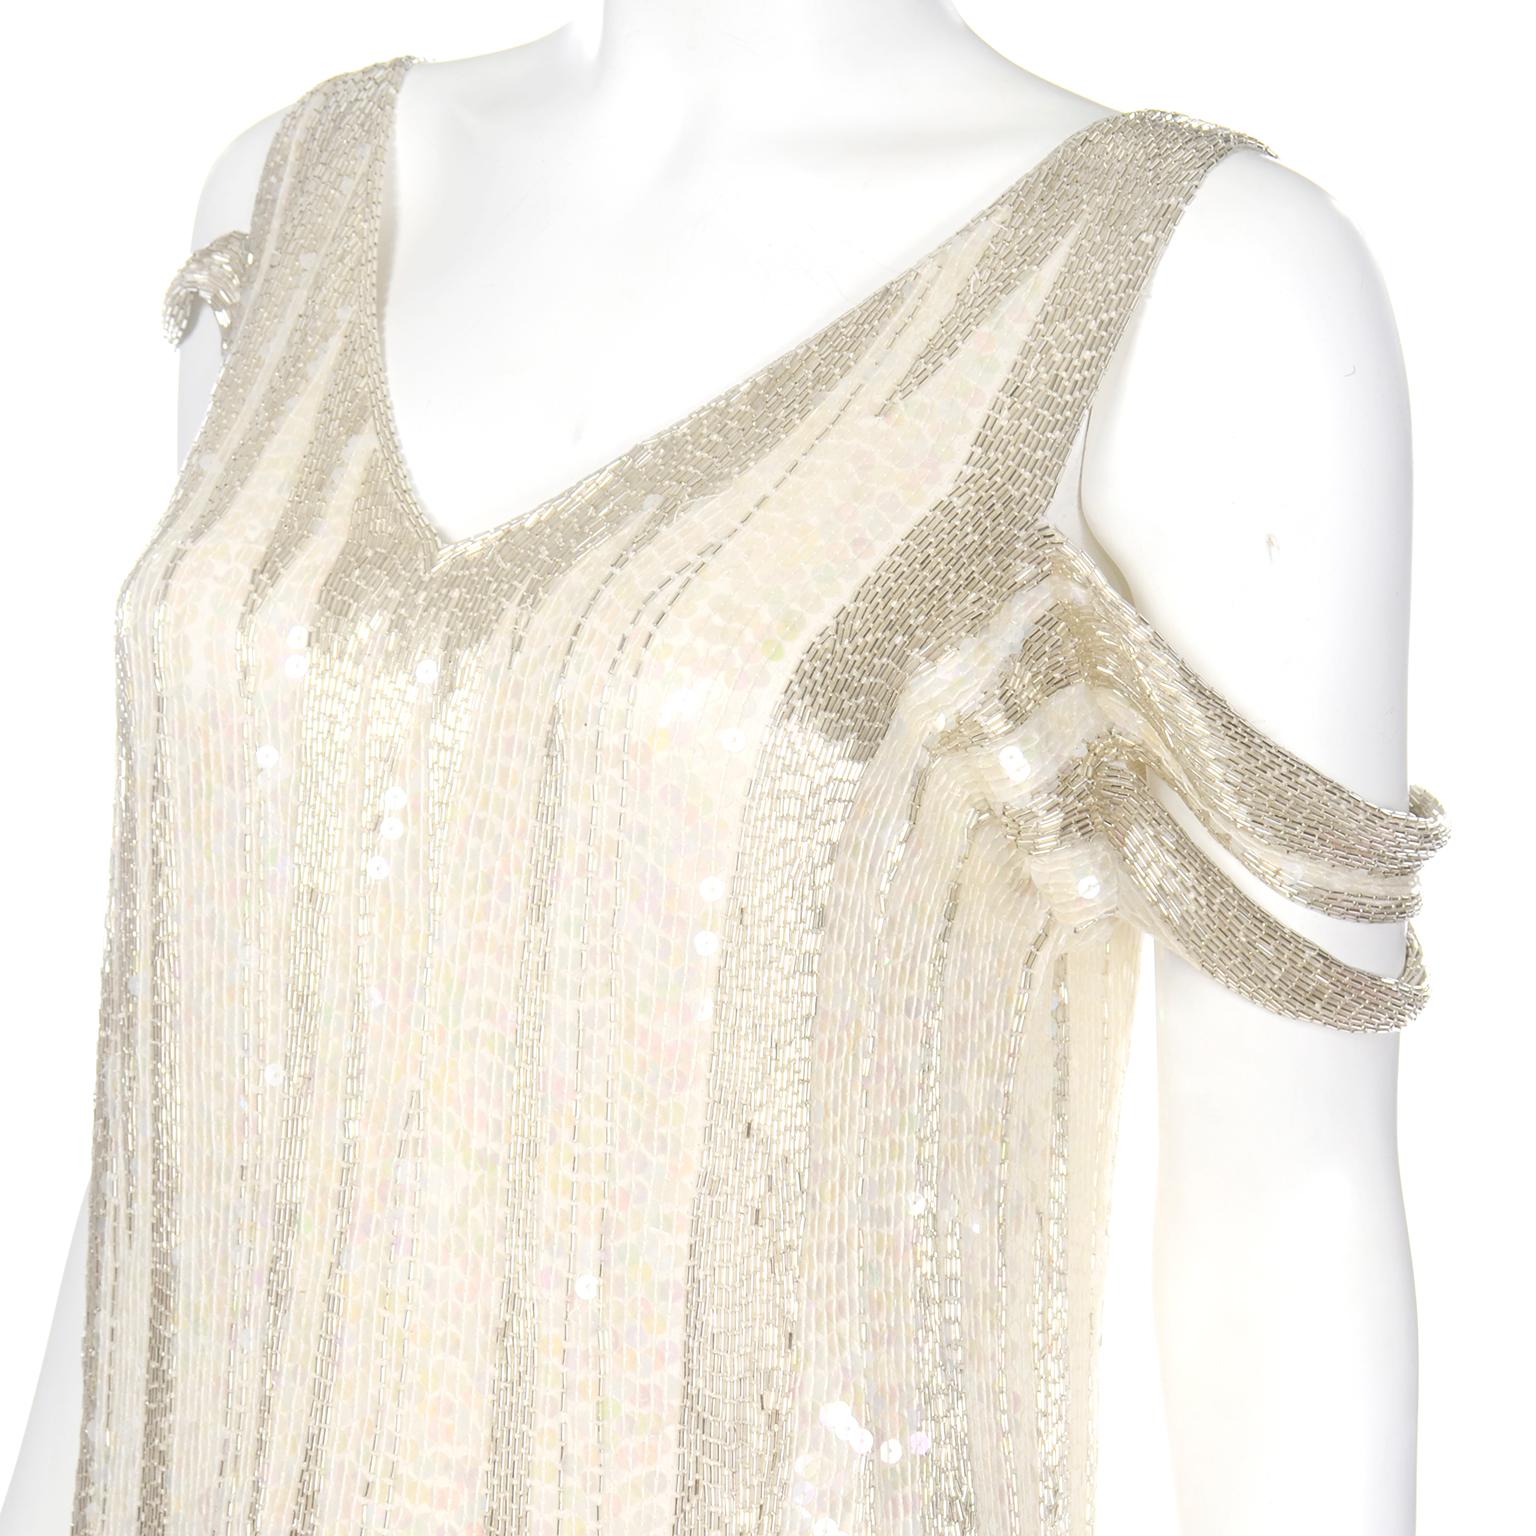 Women's 20s Inspired White & Silver Beaded Flapper Style Evening Dress w Beads & Sequins